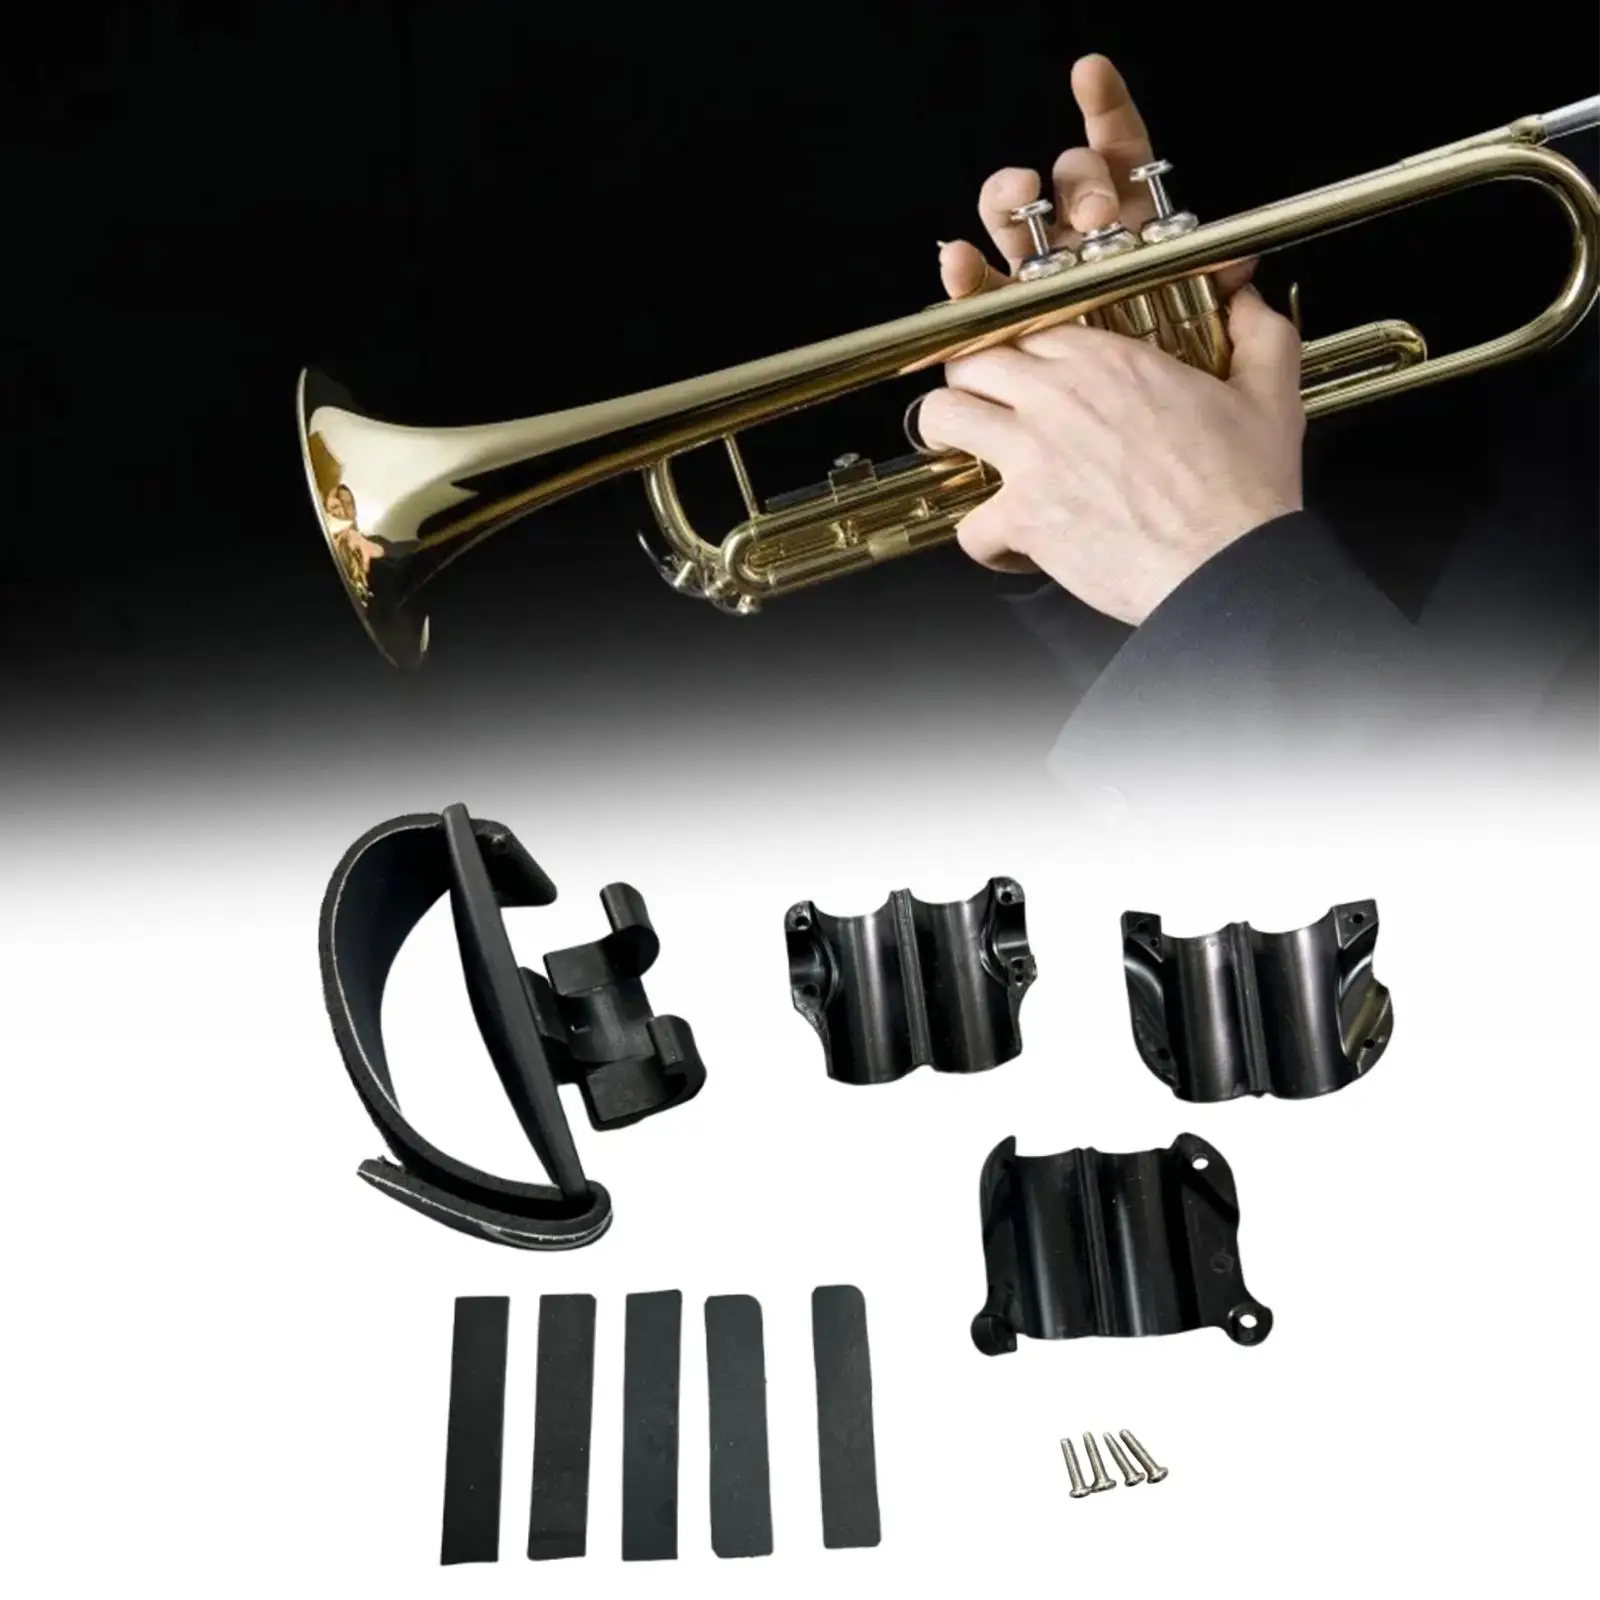 Trombone Grip Musician Gifts Can Balance The Instrument Adjustable Attachments Cleaning Care Accessories with Screws and Straps